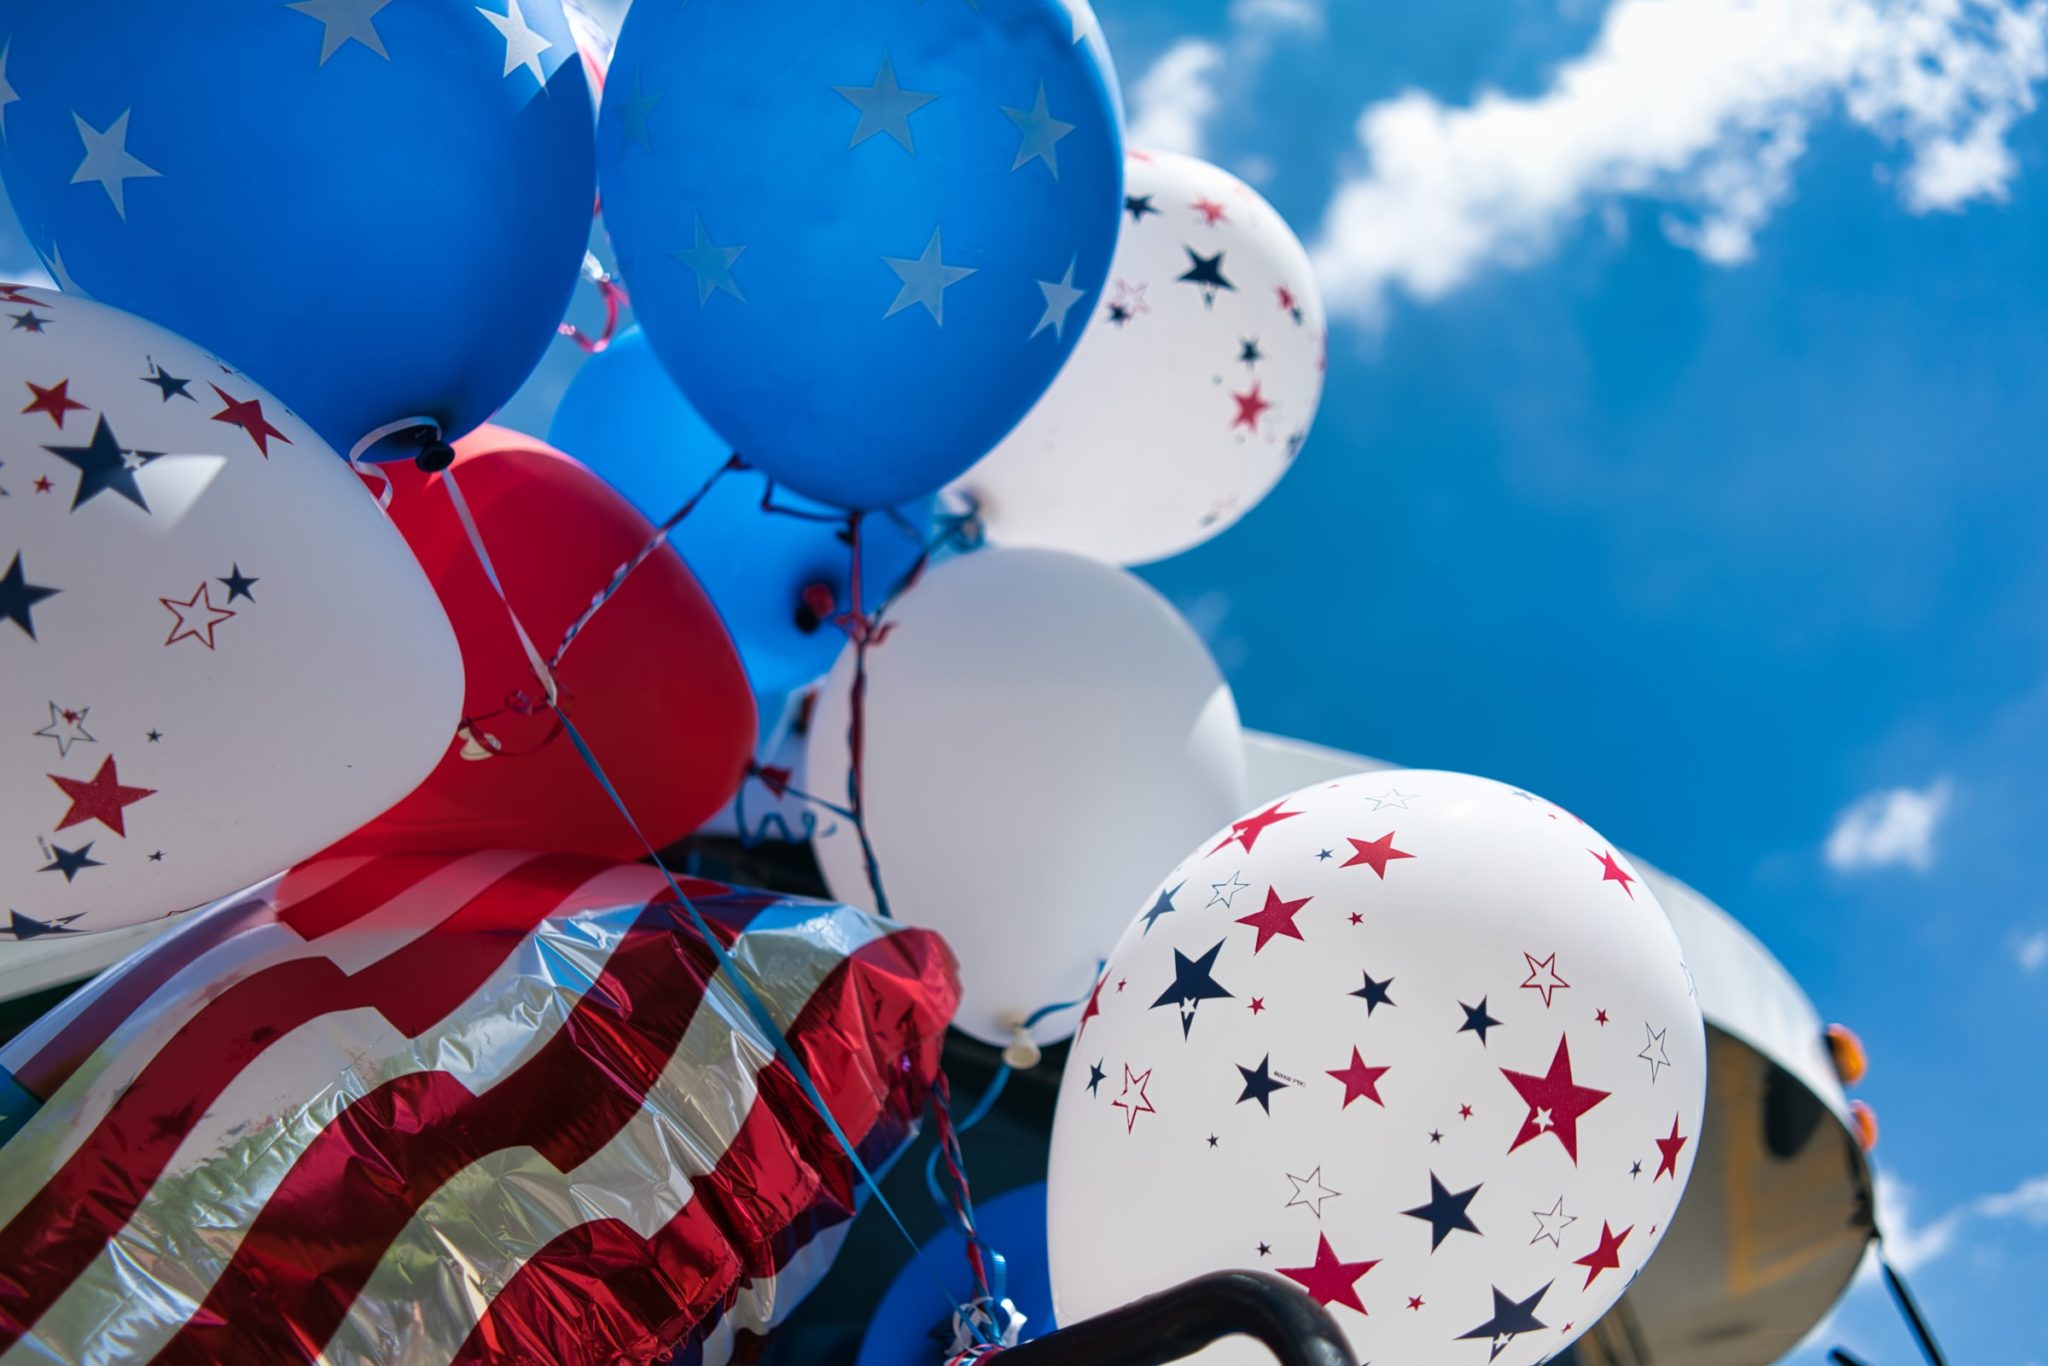 A photo of red, white, and blue balloons, looking upward toward a blue sky with white clouds.